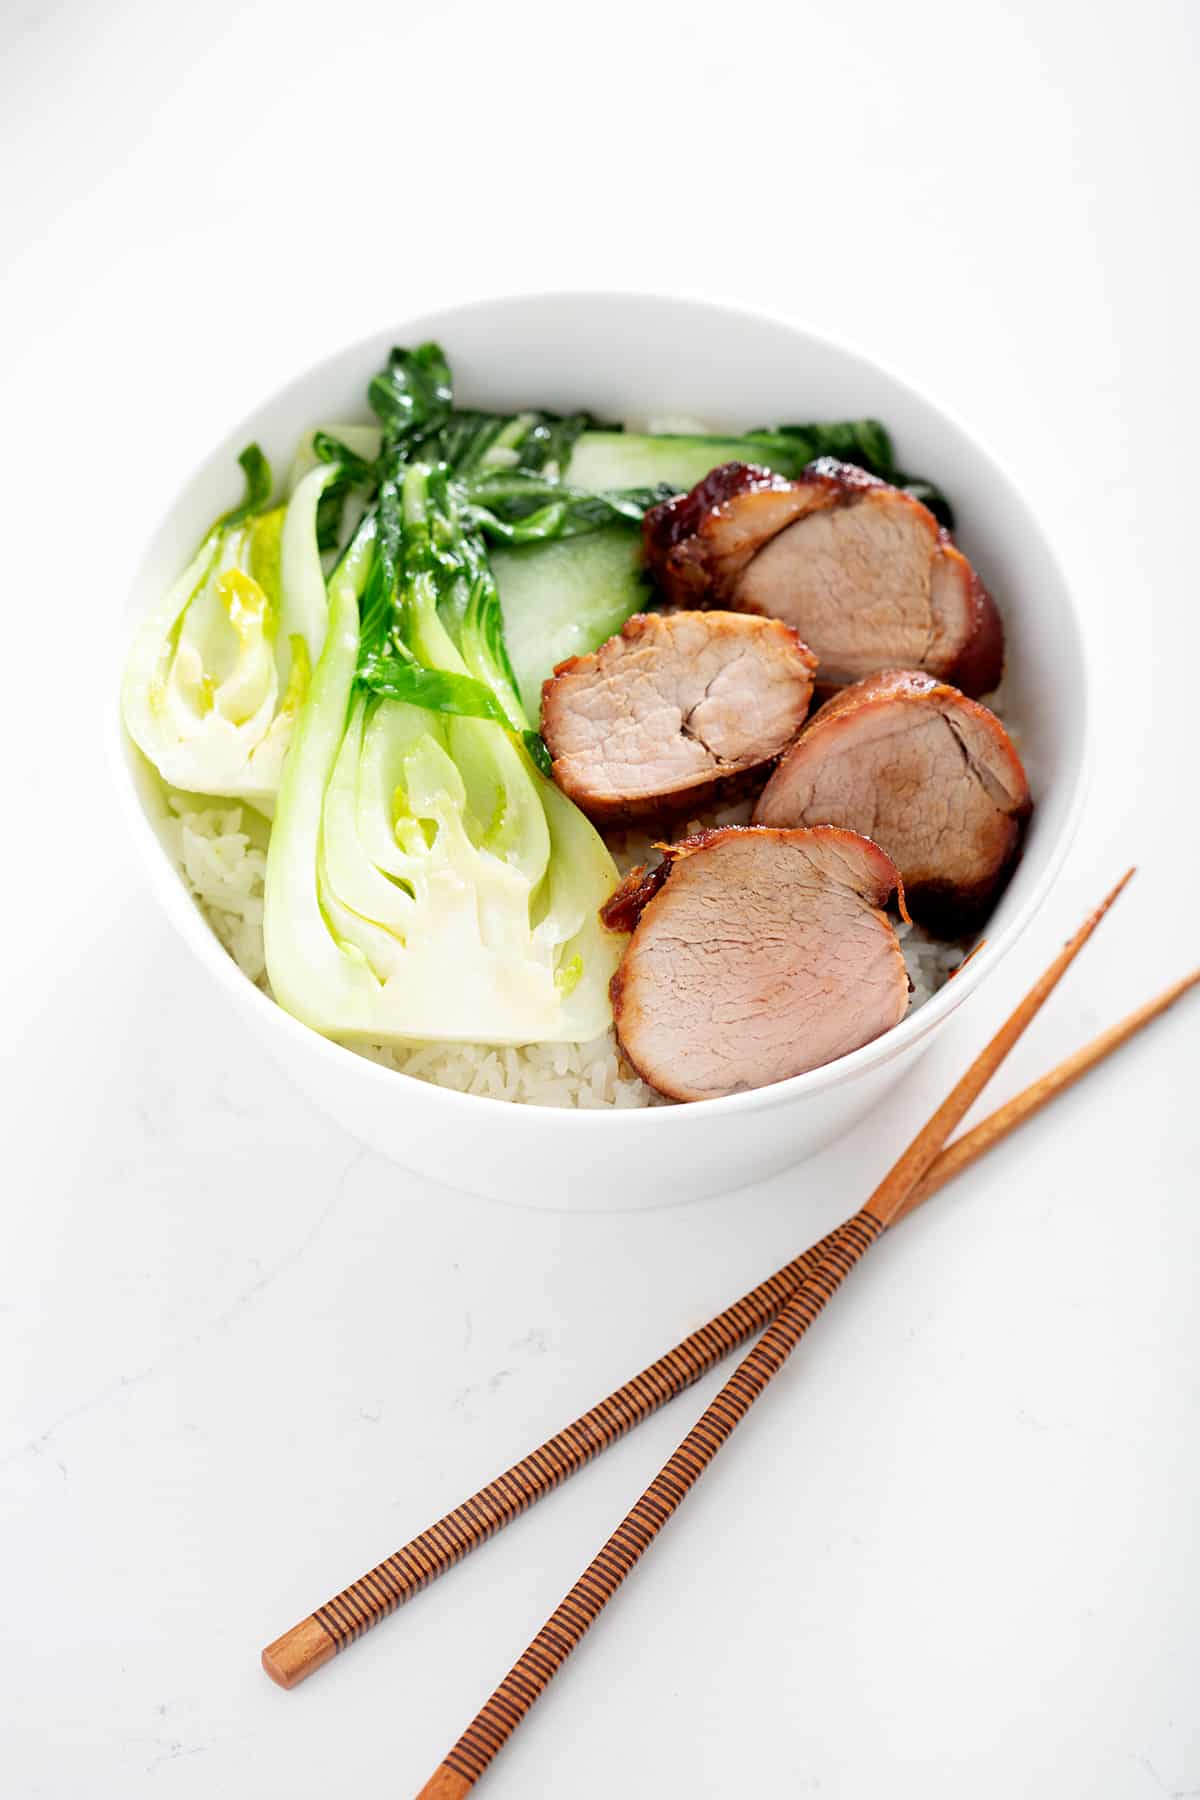 This gluten free Char Siu Sauce is sticky, sweet, savory, salty and of course, red. It’s finger licking good especially when used to marinade pork and slow cooked in the oven. This Chinese BBQ pork recipe is easy as it is delicious.